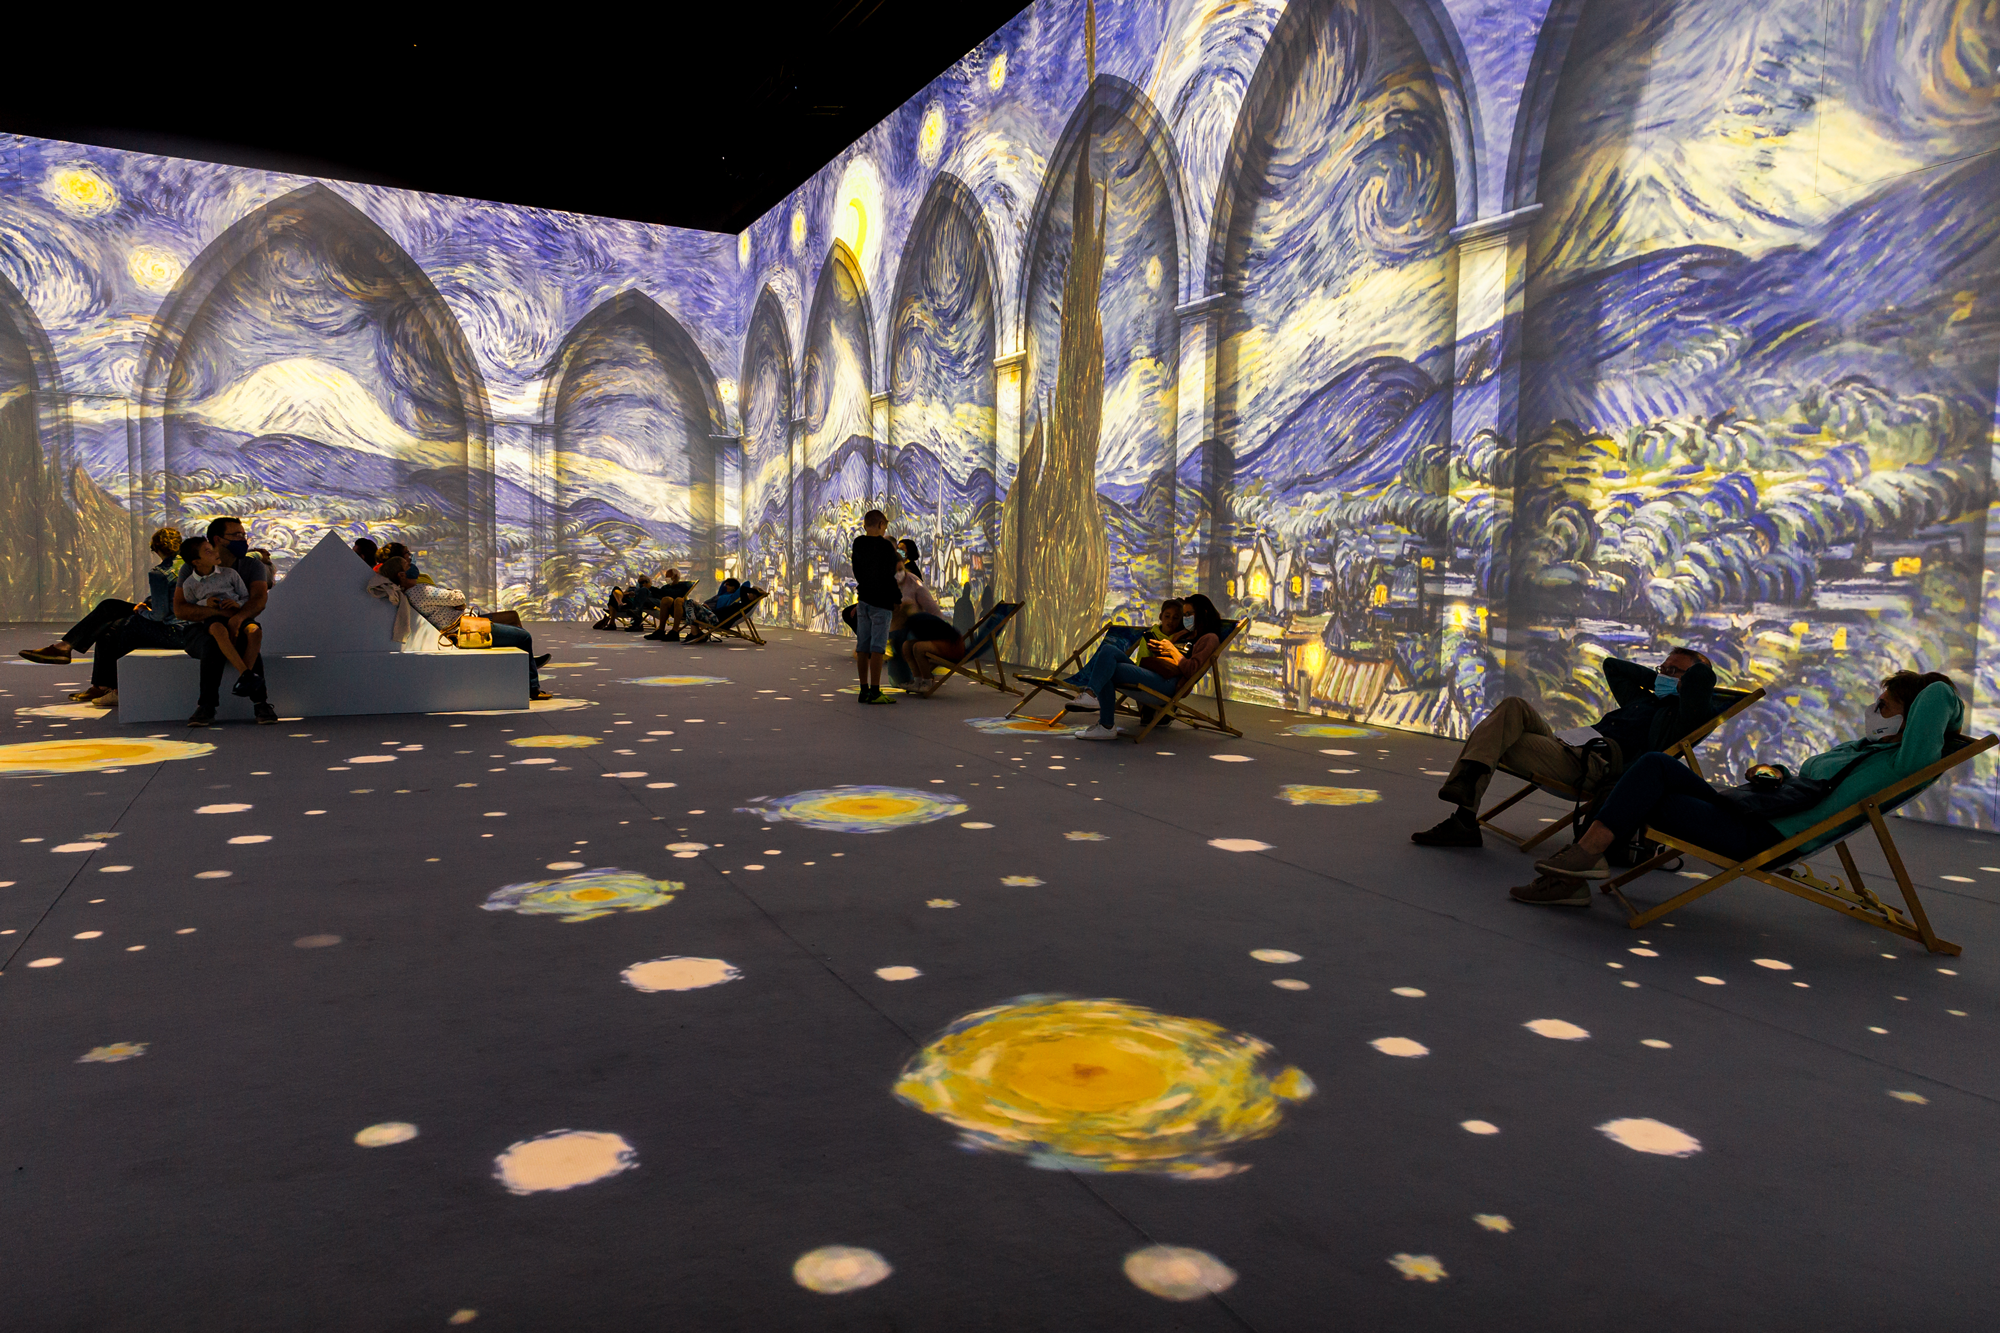 VAN GOGH: THE IMMERSIVE EXPERIENCE COMES TO BRISTOL THIS APRIL